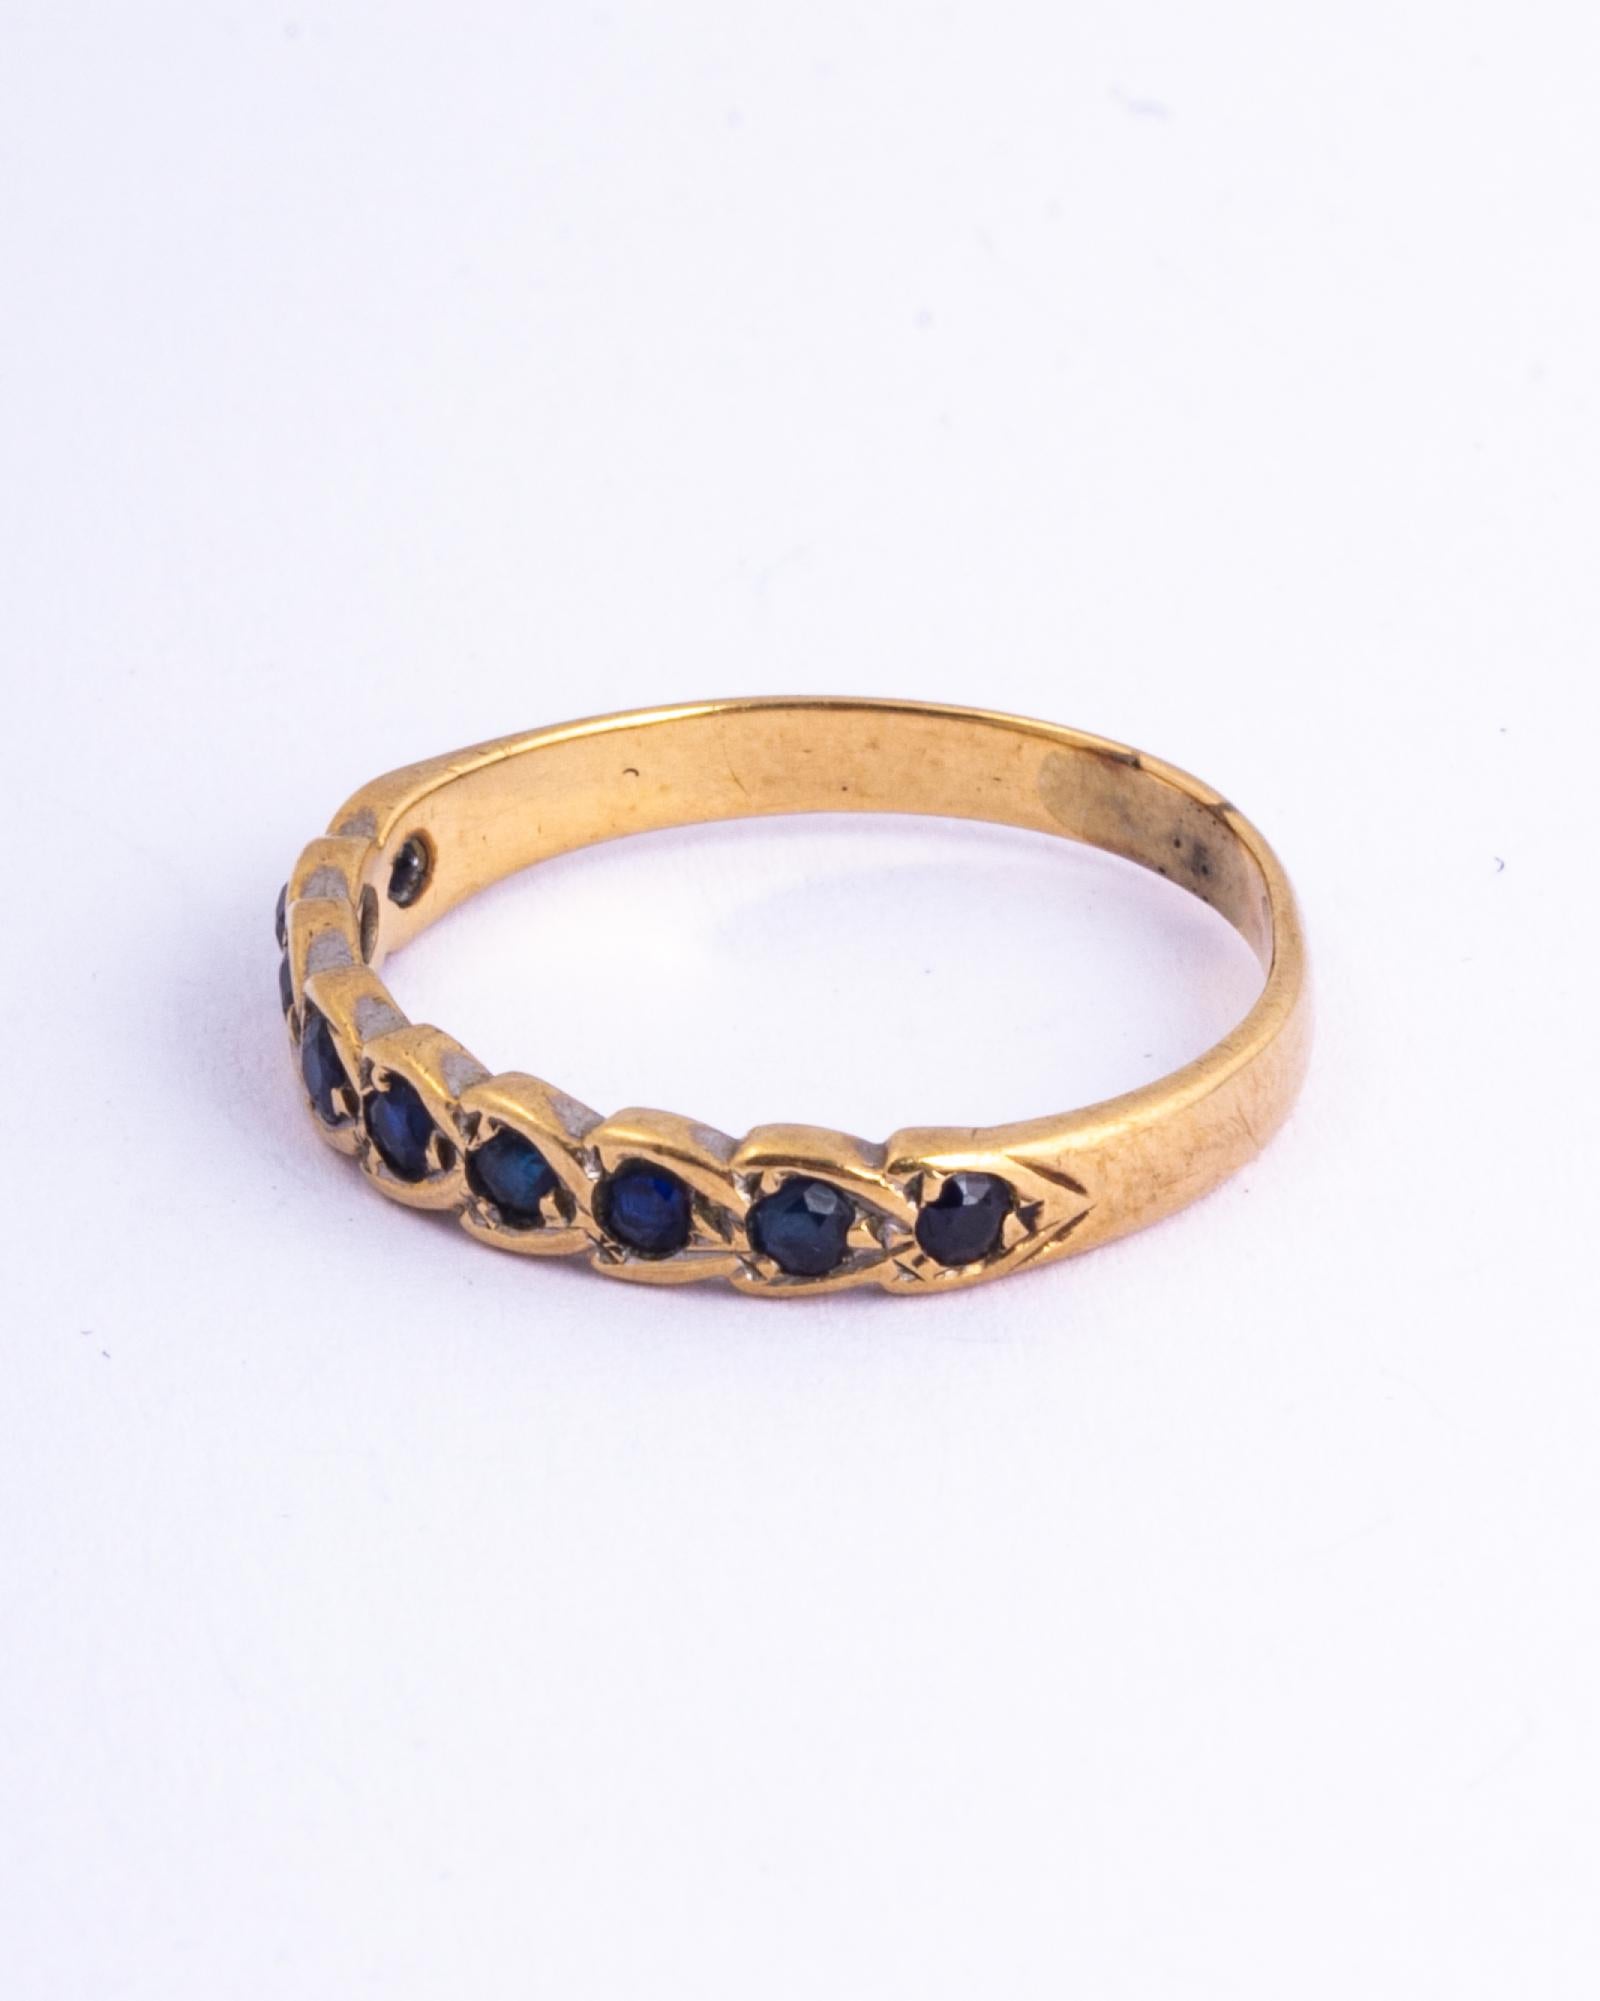 The nine sapphires in this band measure approx 4pts each. The stones are set within an engraved platinum band. Made in Birmingham, England. 

Ring Size: N or 6 3/4
Band Width: 3mm

Weight: 1.5g